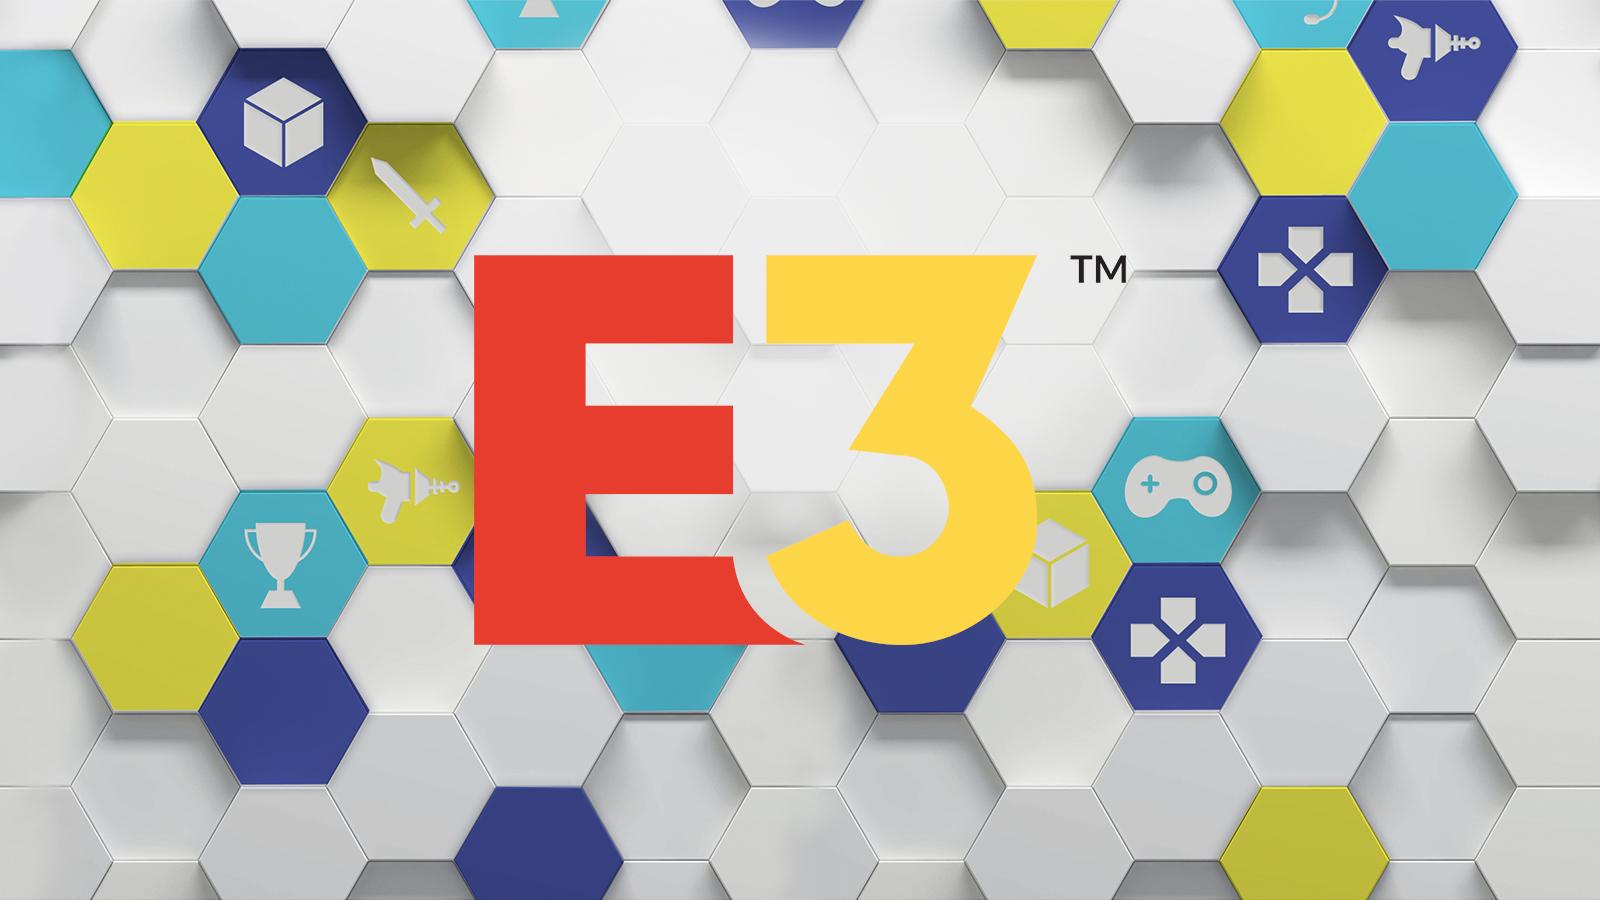 E3 2018: All the games, trailers and reveals that actually matter